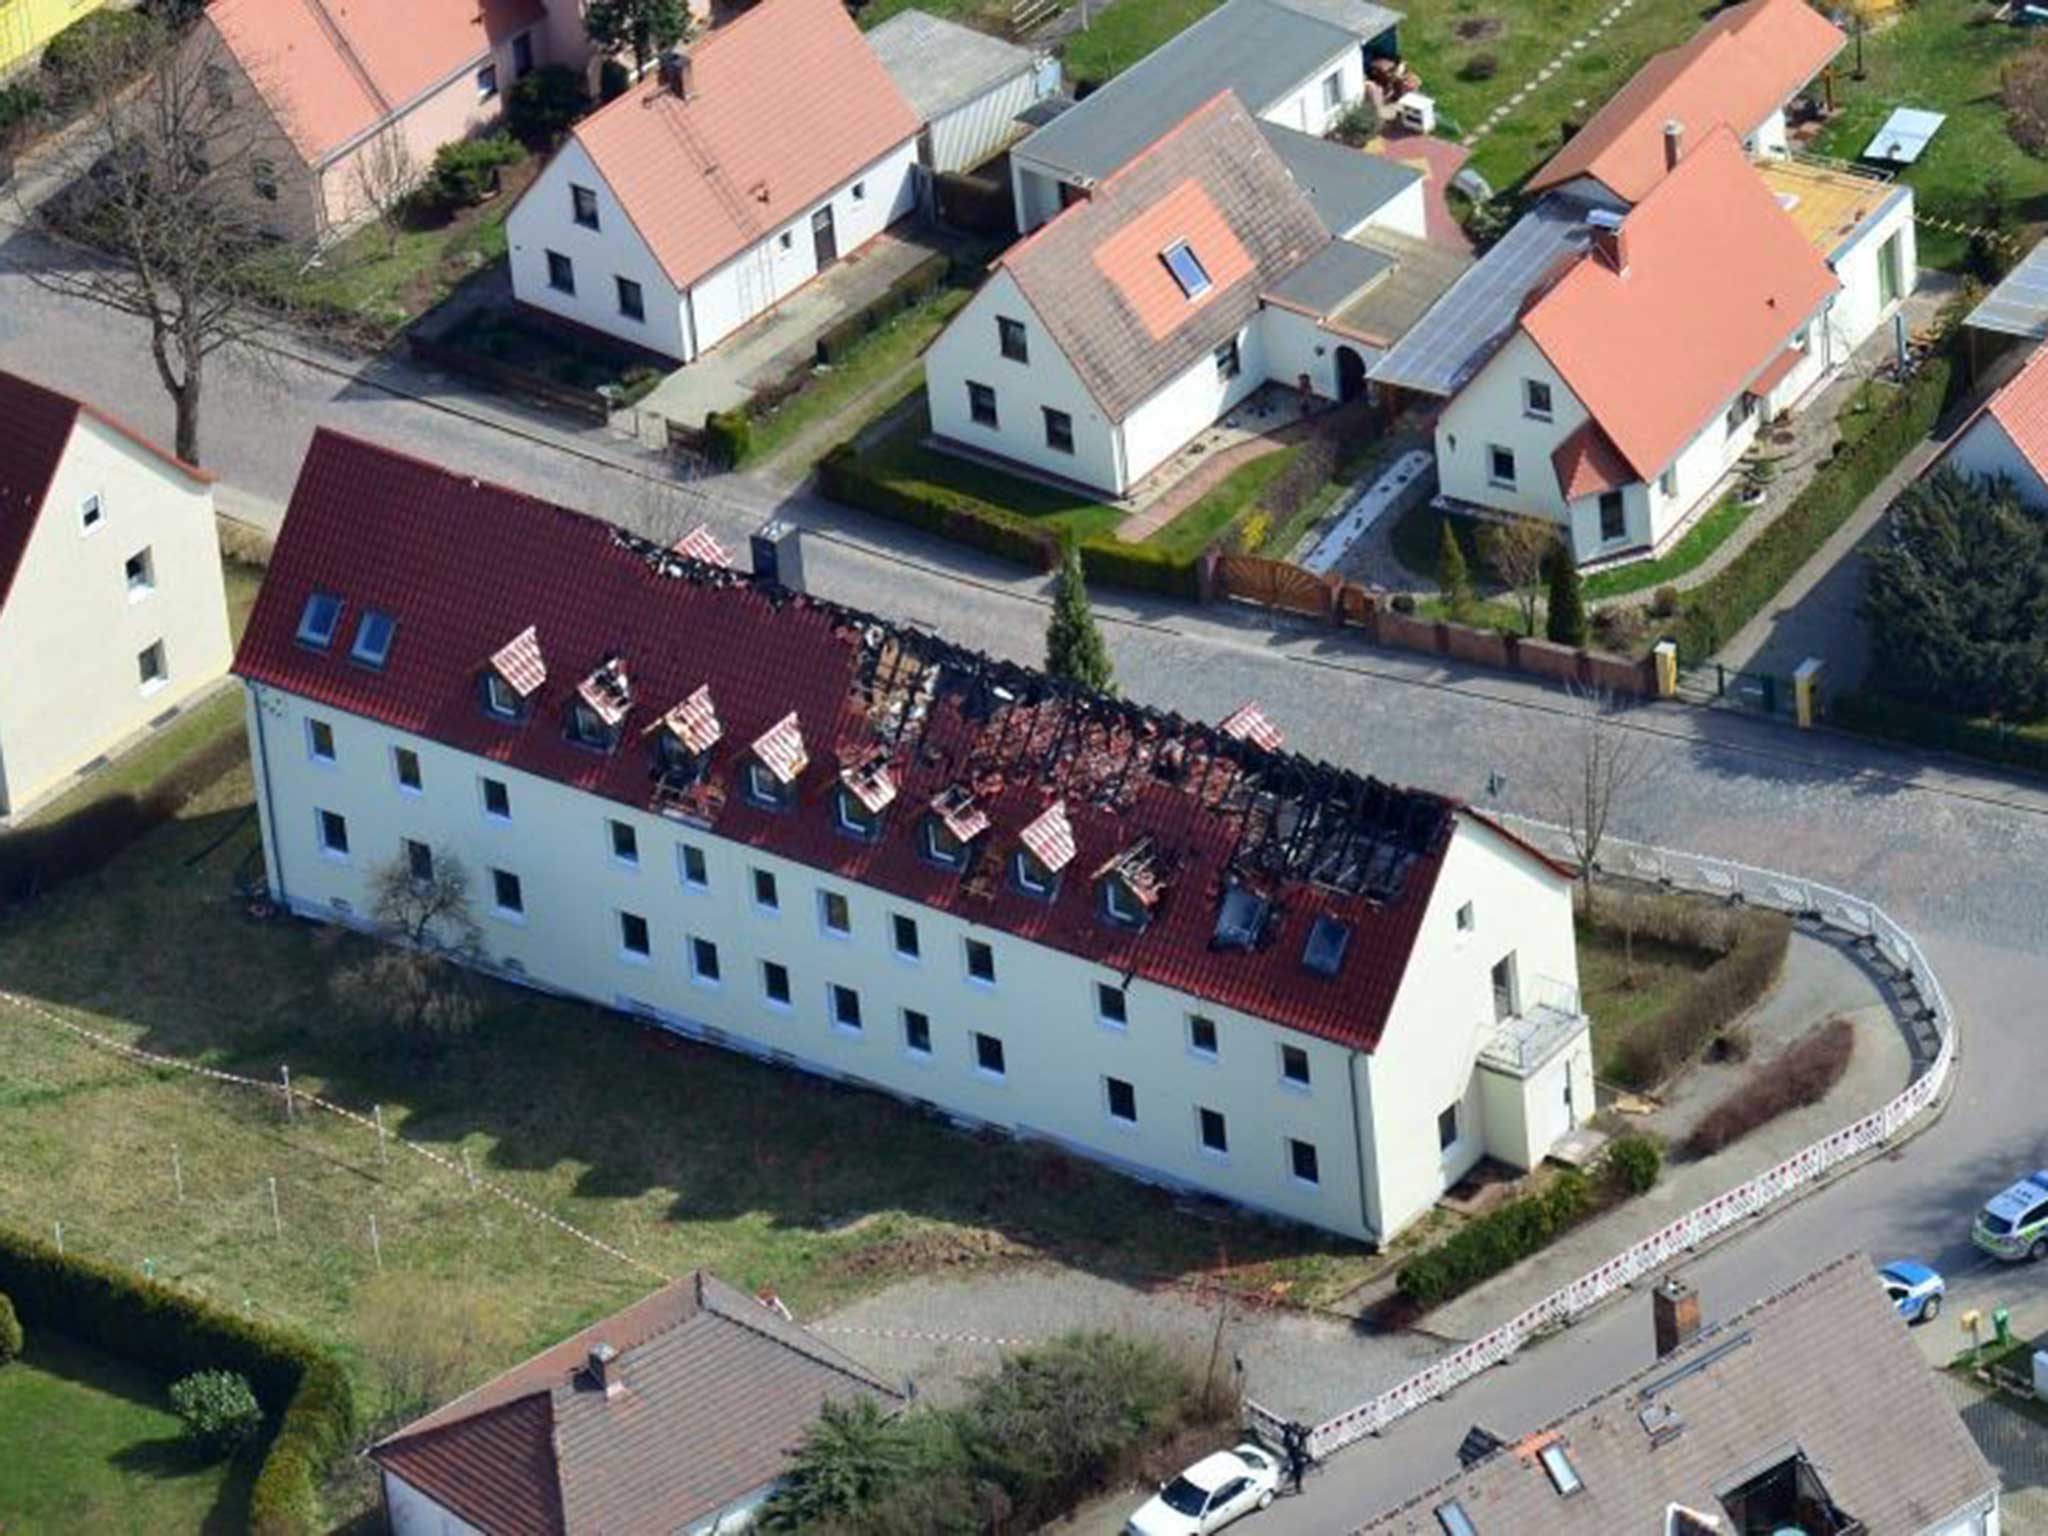 The fire-damaged roof of the hostel in Tröglitz